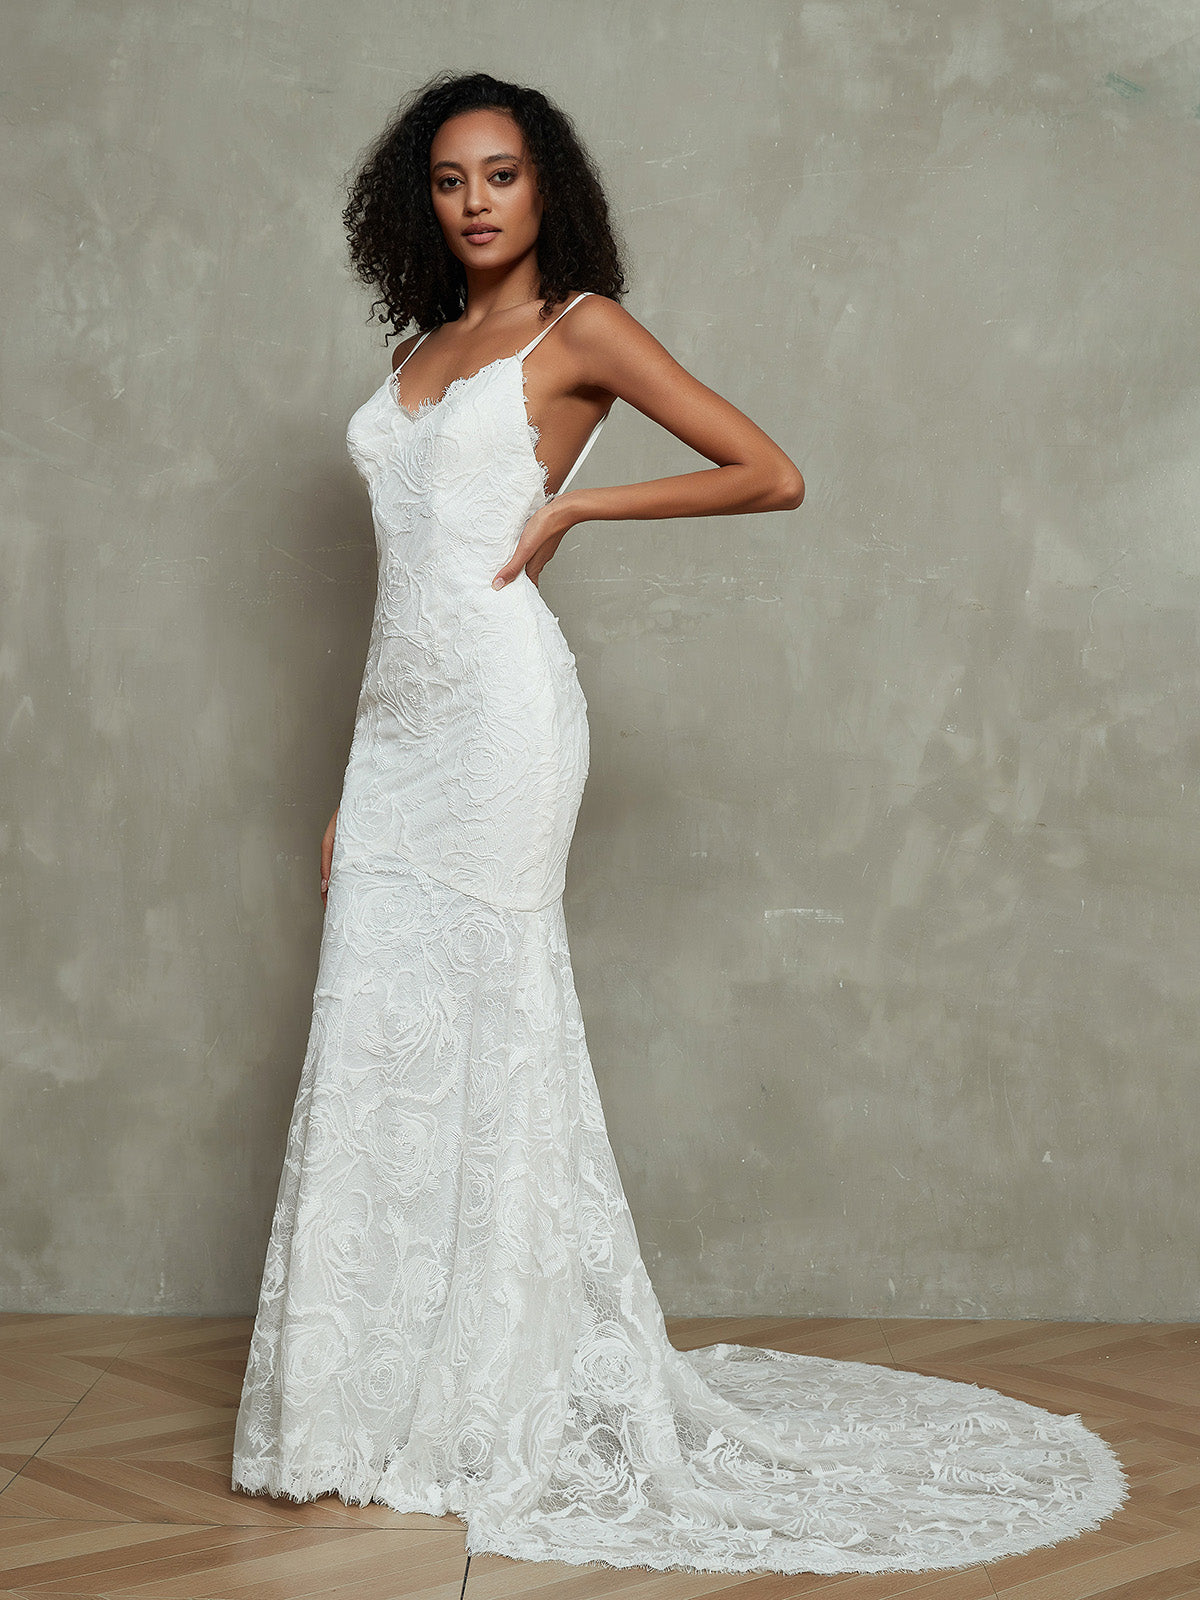 Classic ivory a-line wedding dress with lace applique and sheer illusion  straps